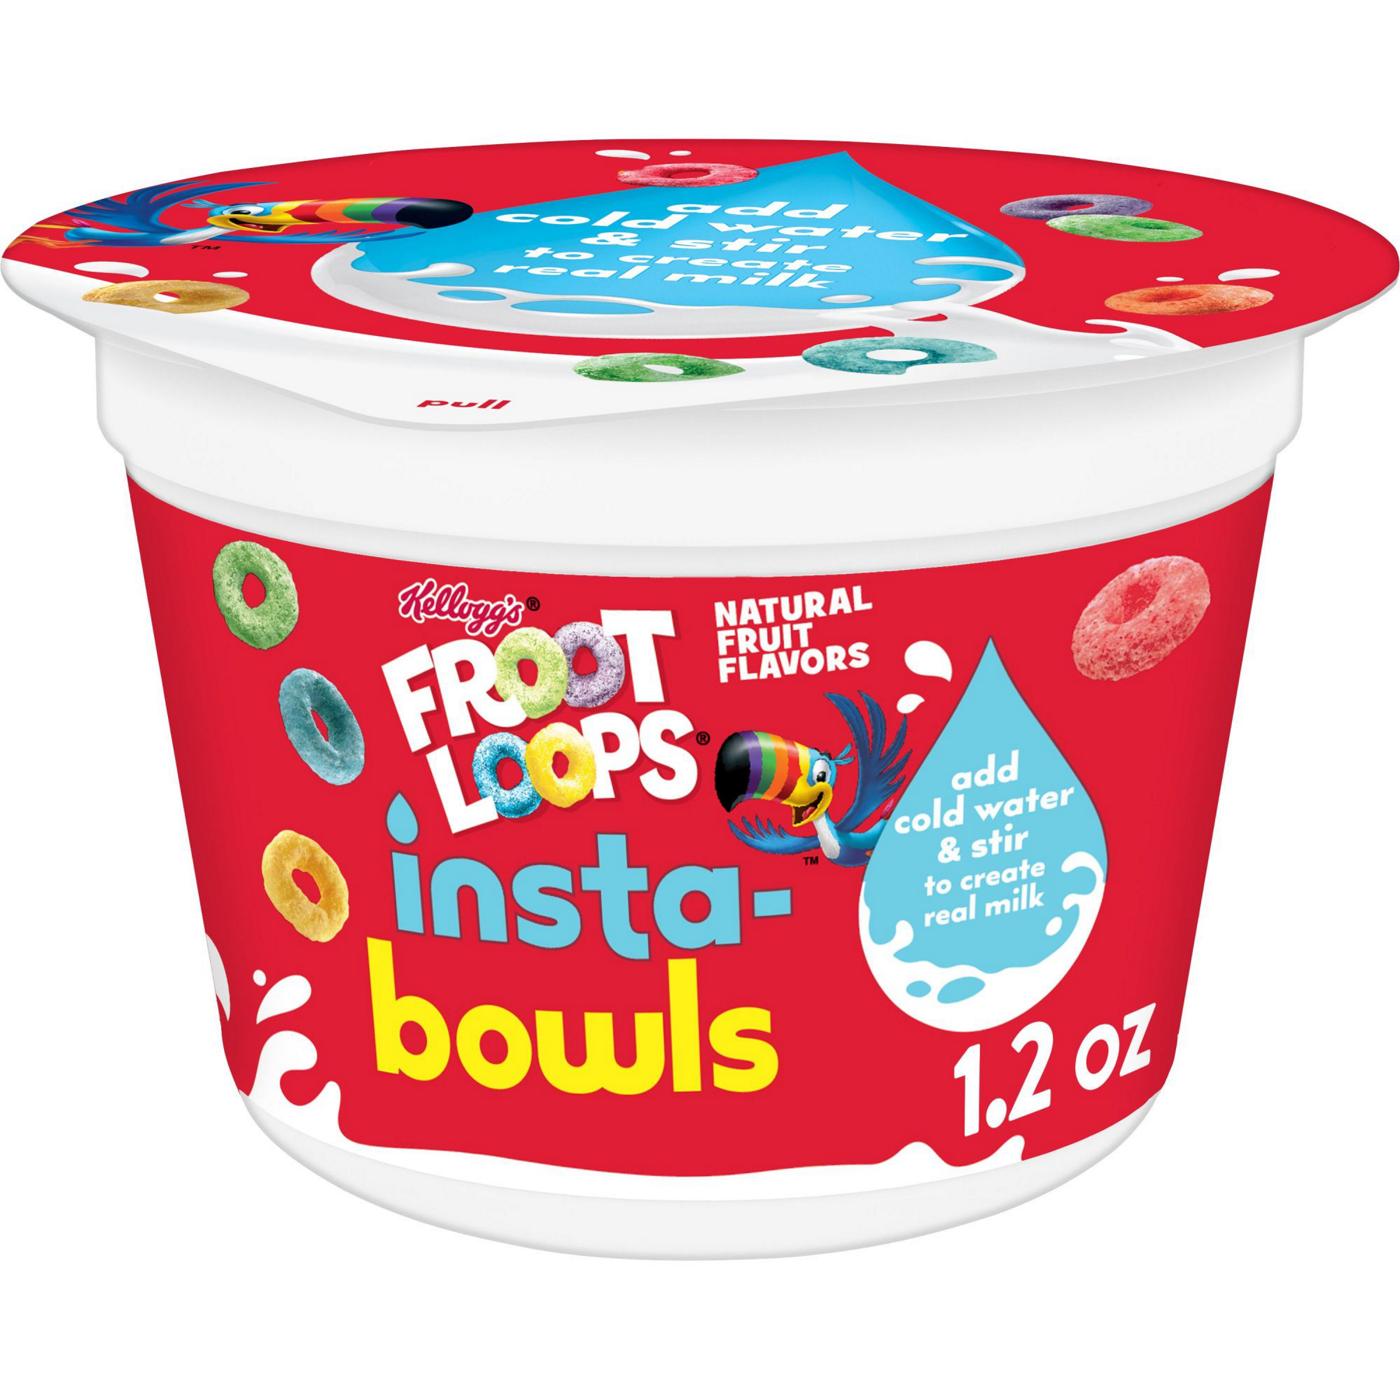 Kellogg's Froot Loops Insta-Bowls Cereal Cup; image 1 of 5